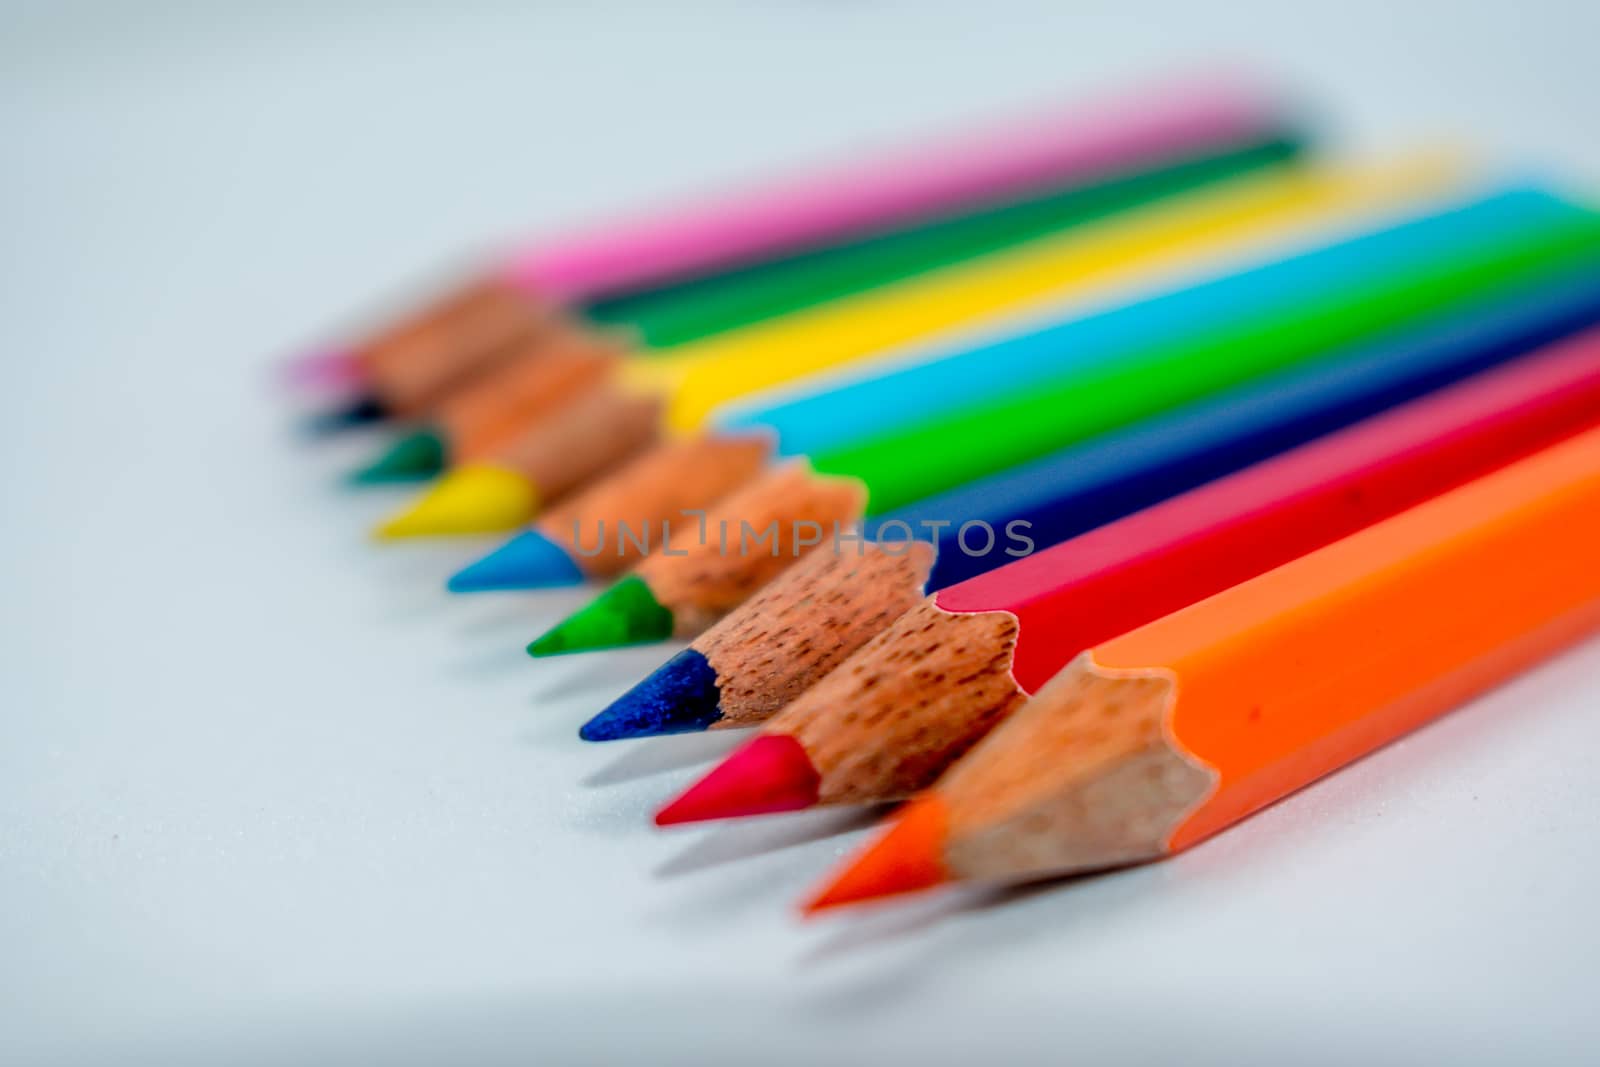 Pencils lined up in shallow focus. by sudiptabhowmick